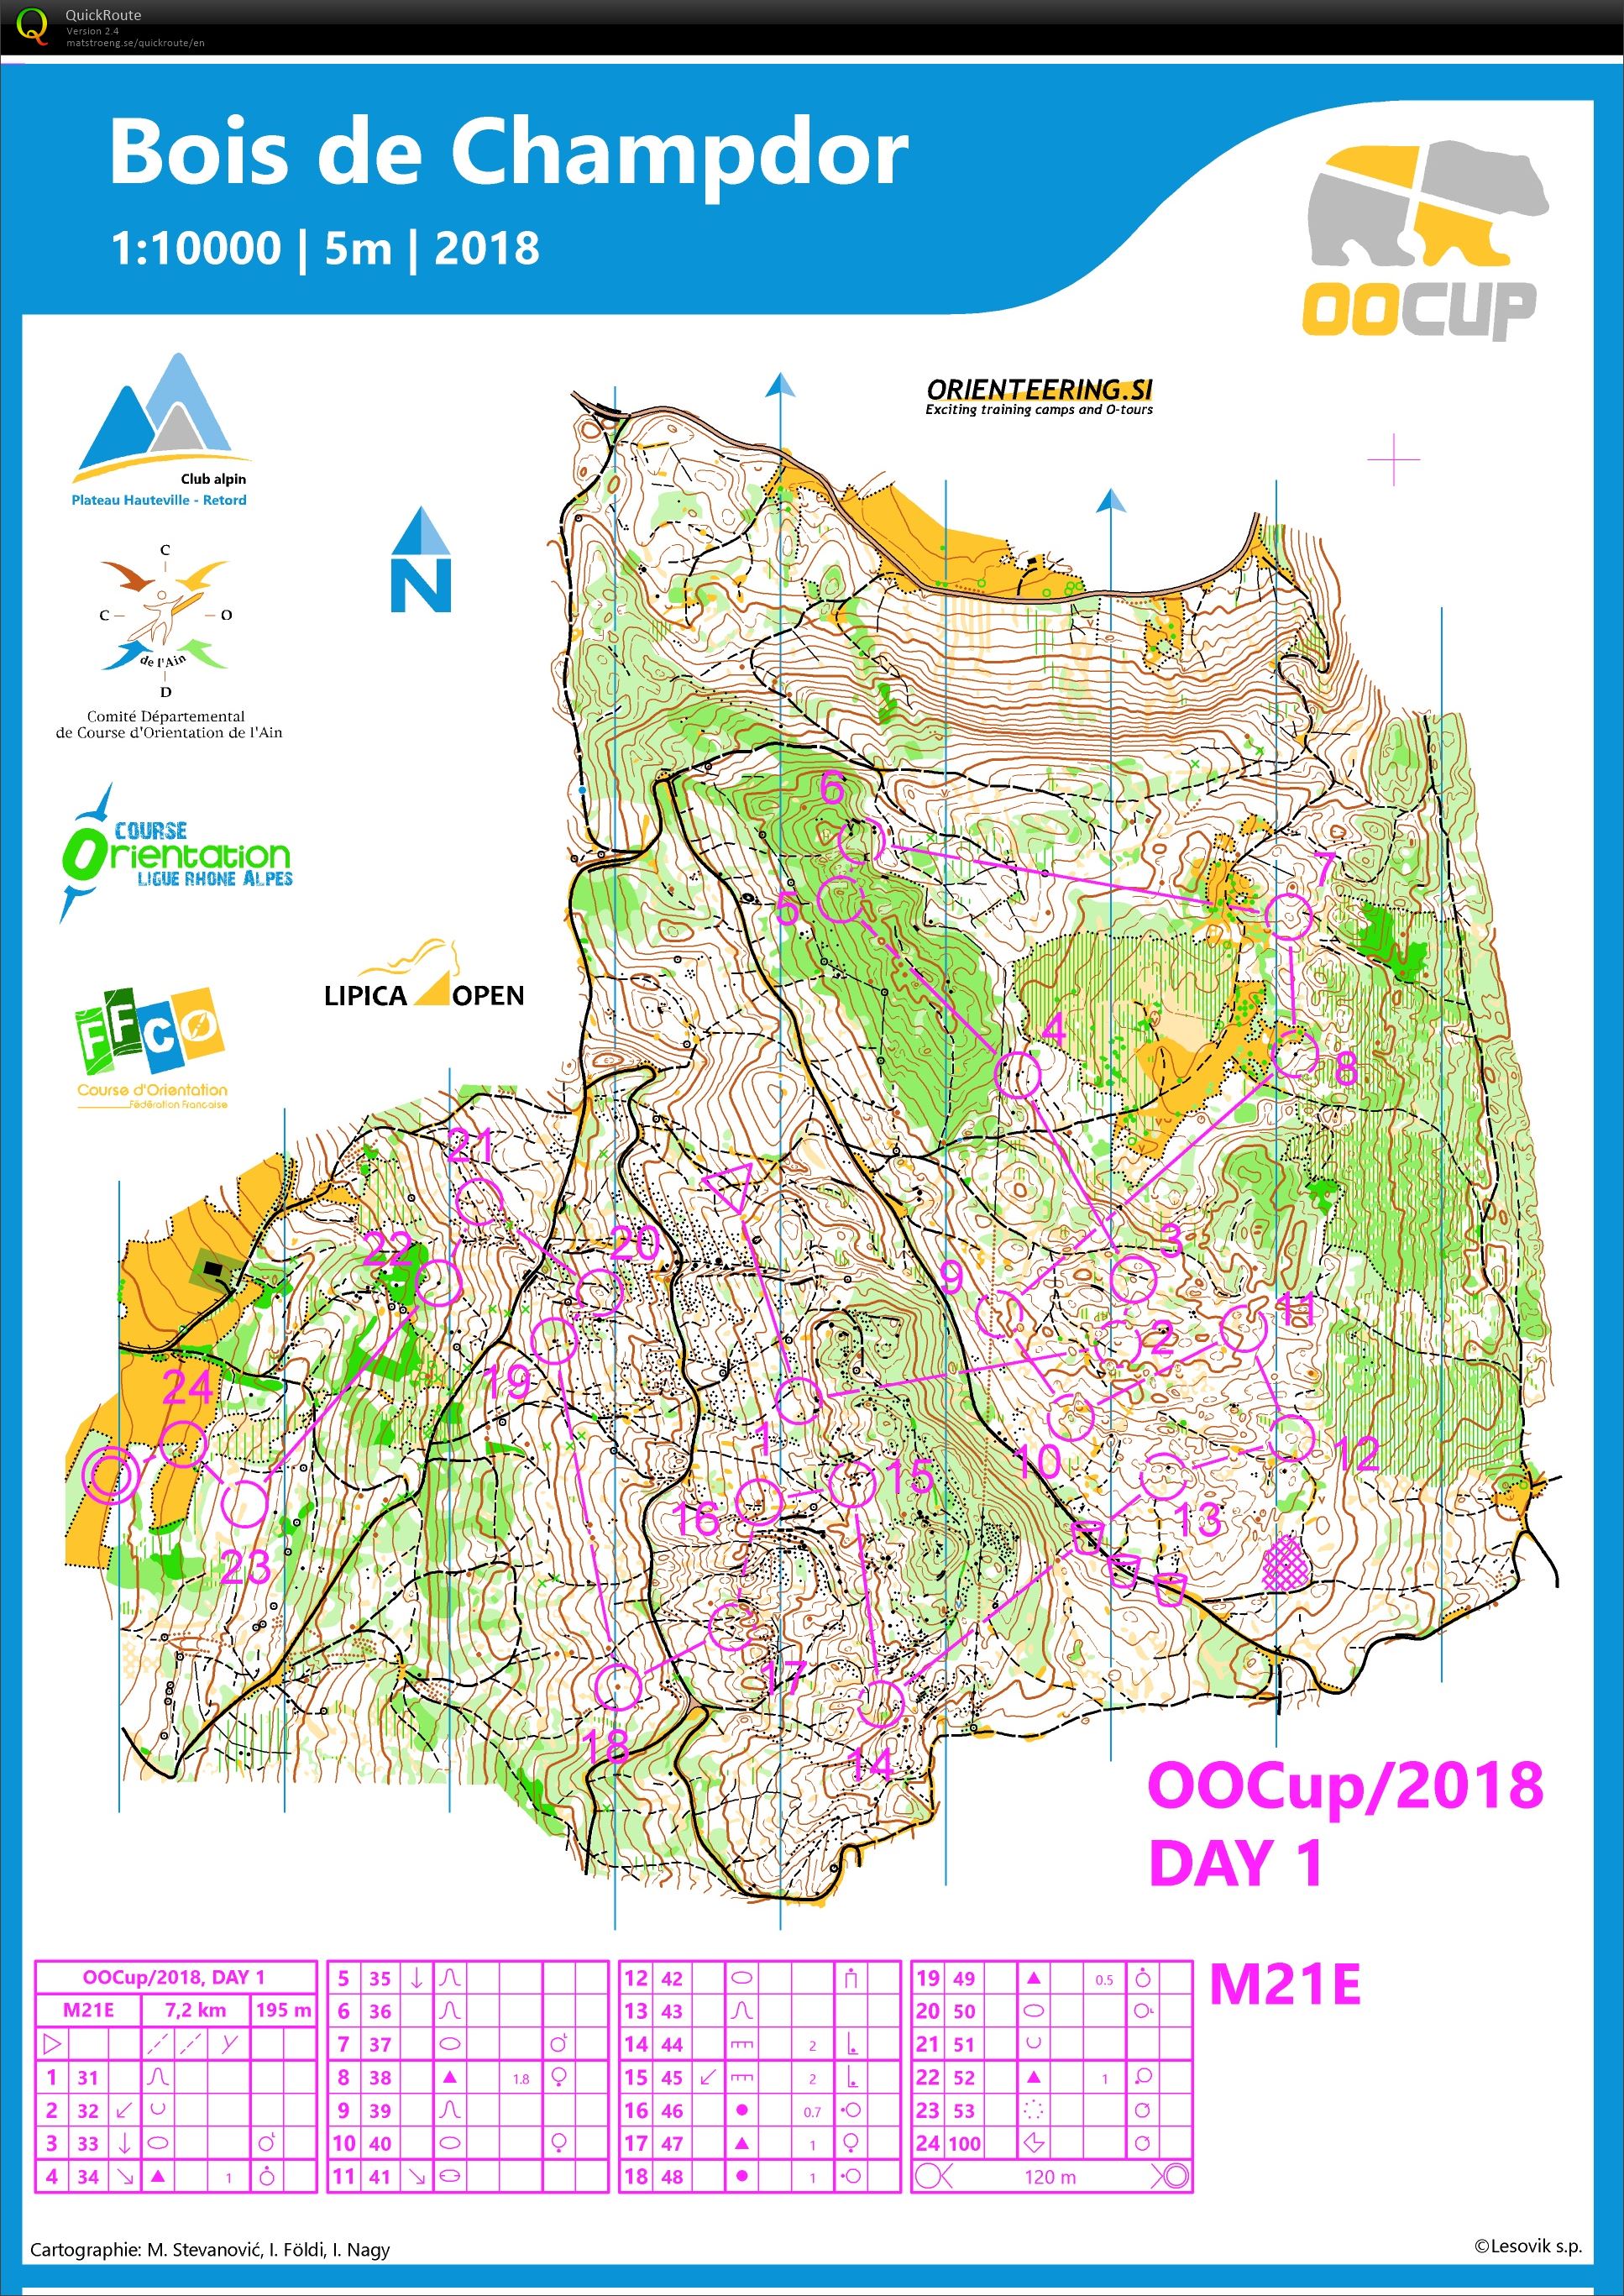 OOCup Stage 1 (25/07/2018)